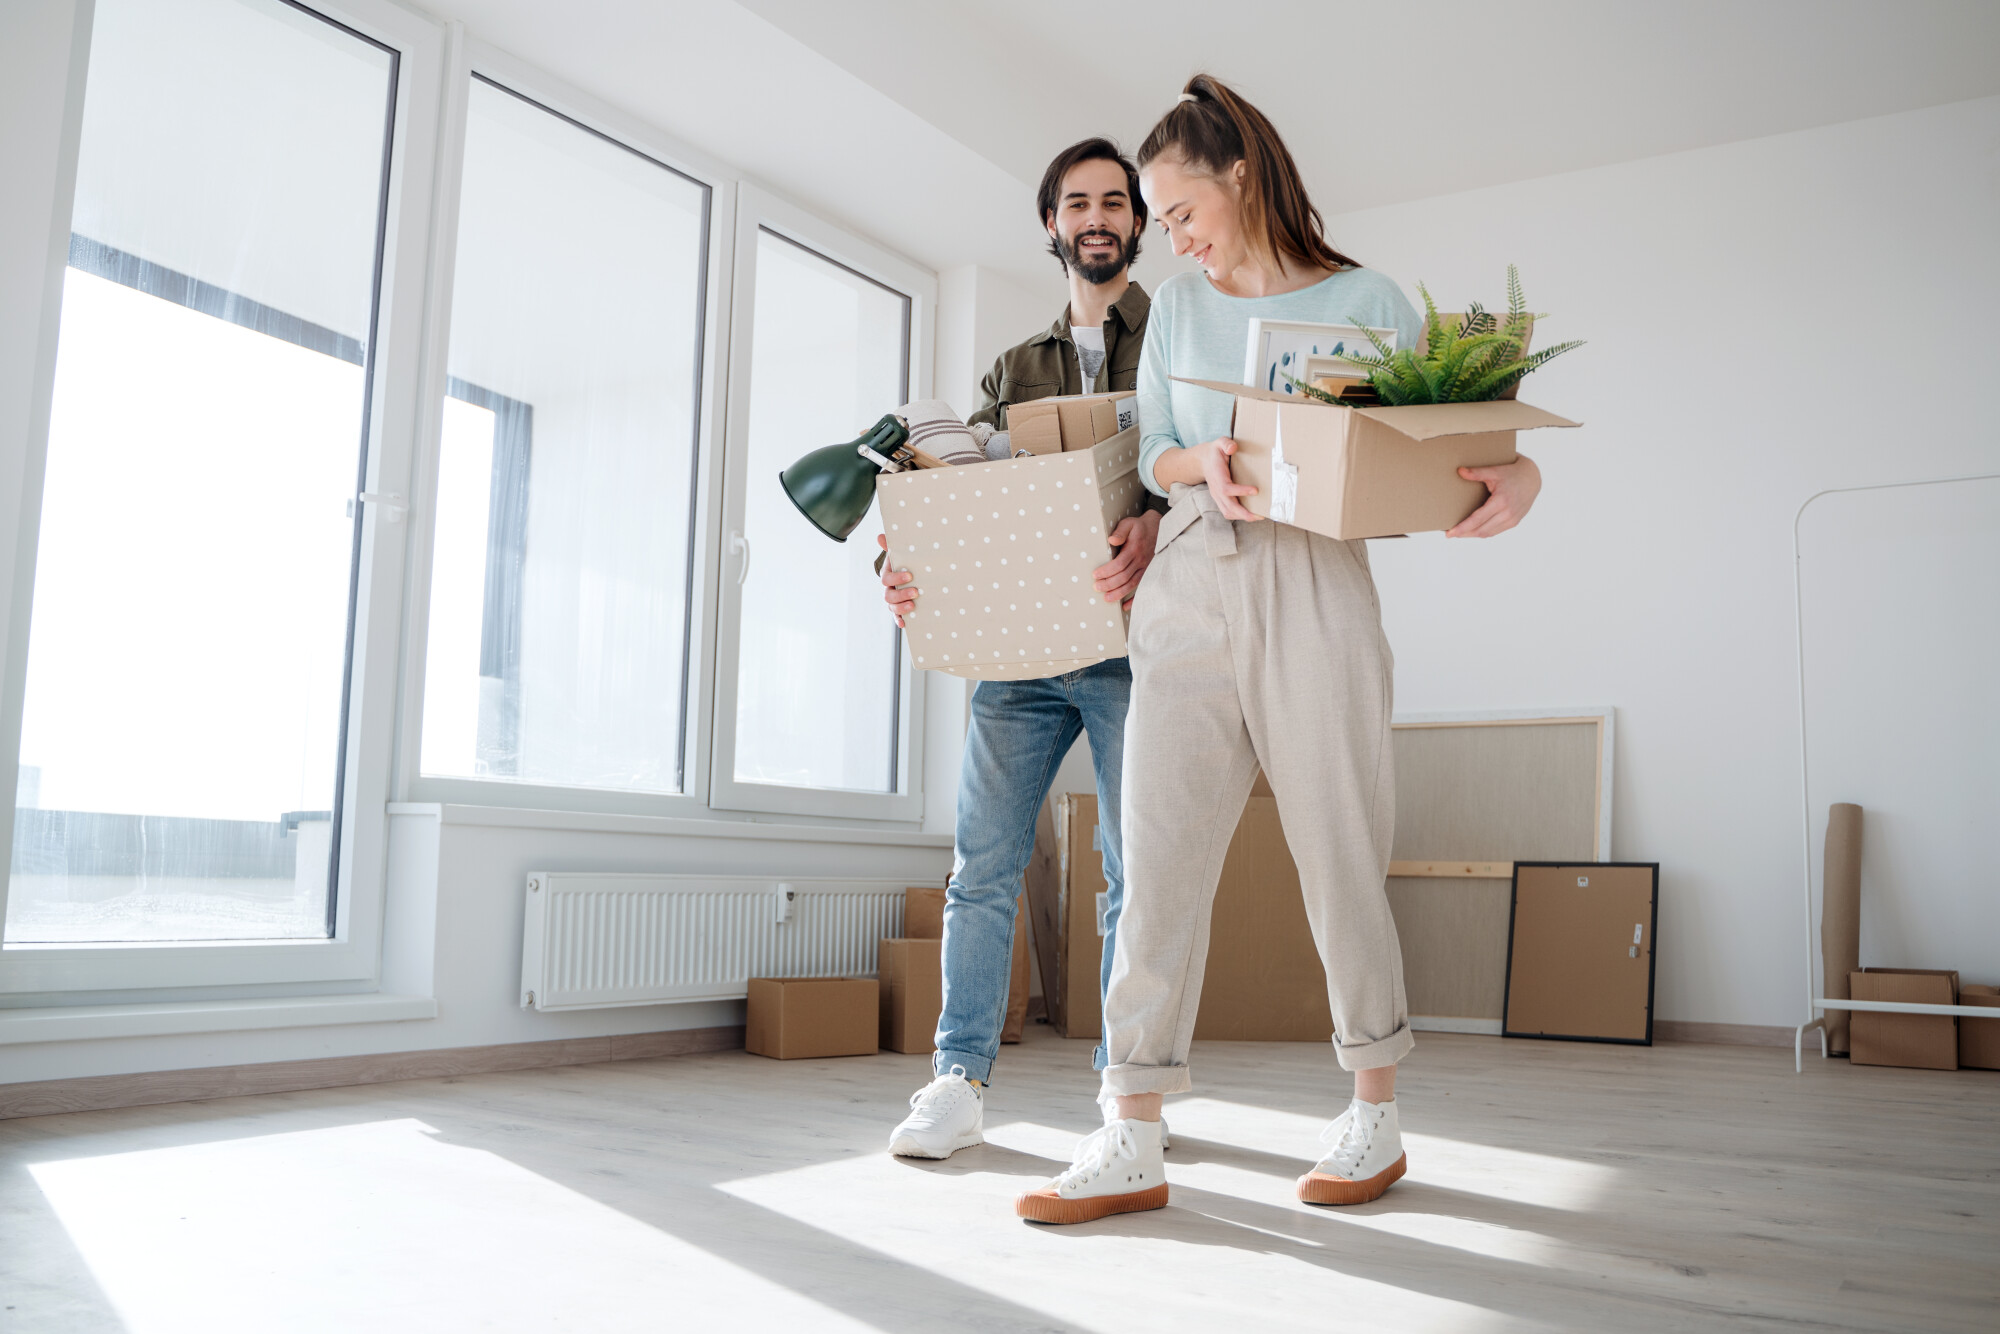 Top 4 Reasons to Buy a New Apartment